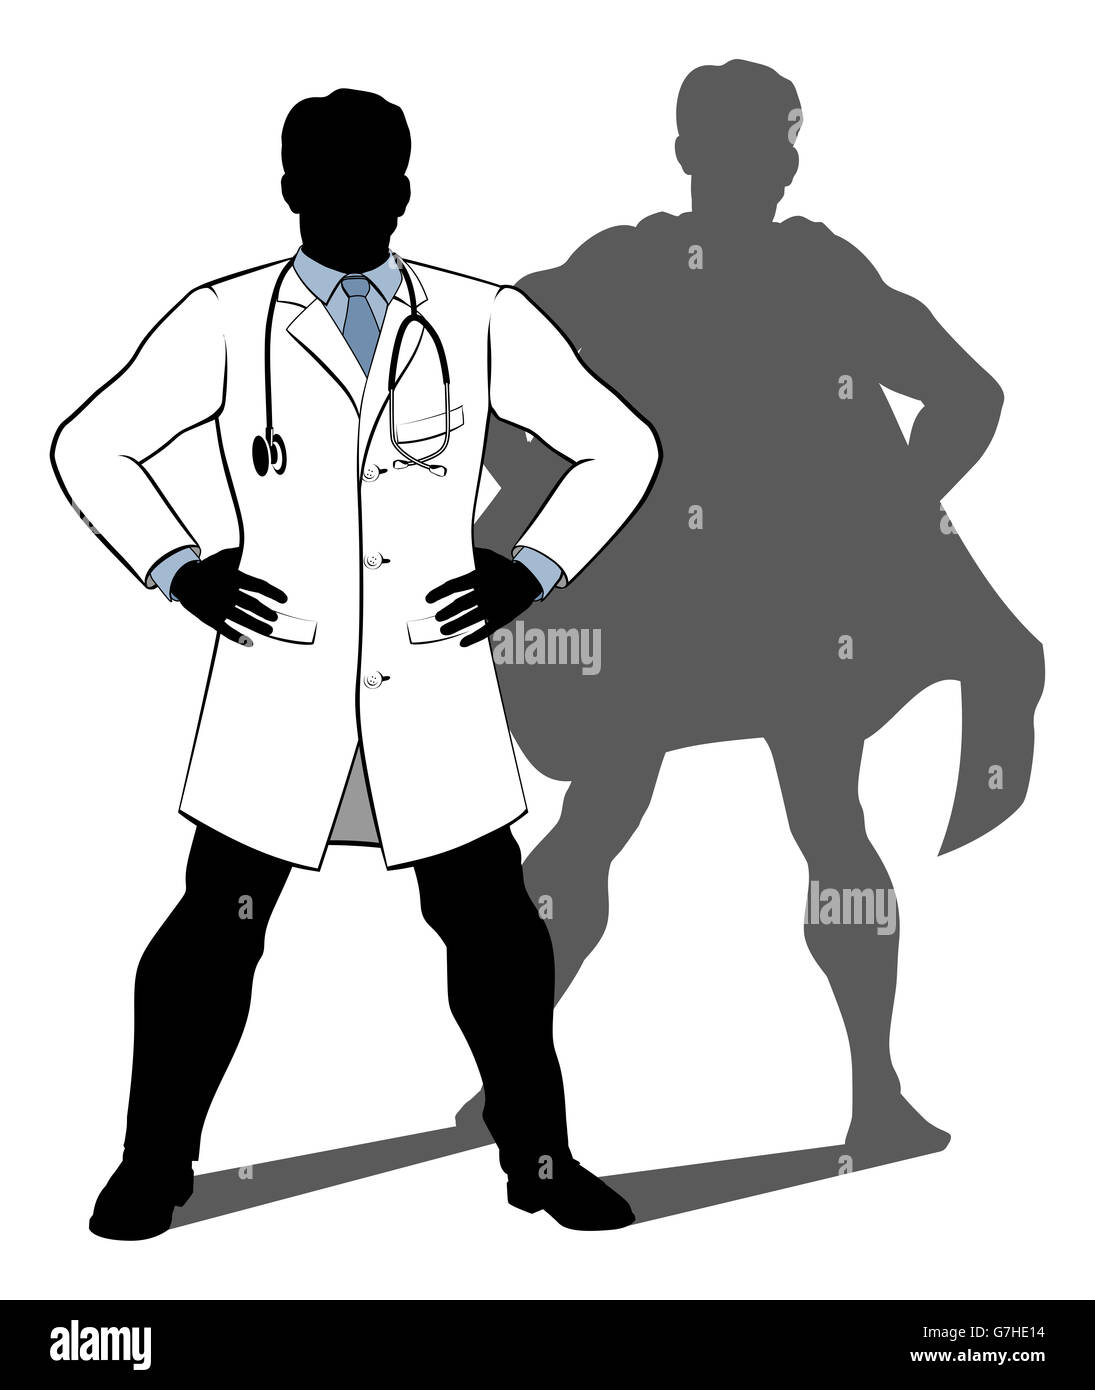 A doctor super hero silhouette conceptual illustration of a doctor standing with his hands on his hips with a shadow revealing h Stock Photo